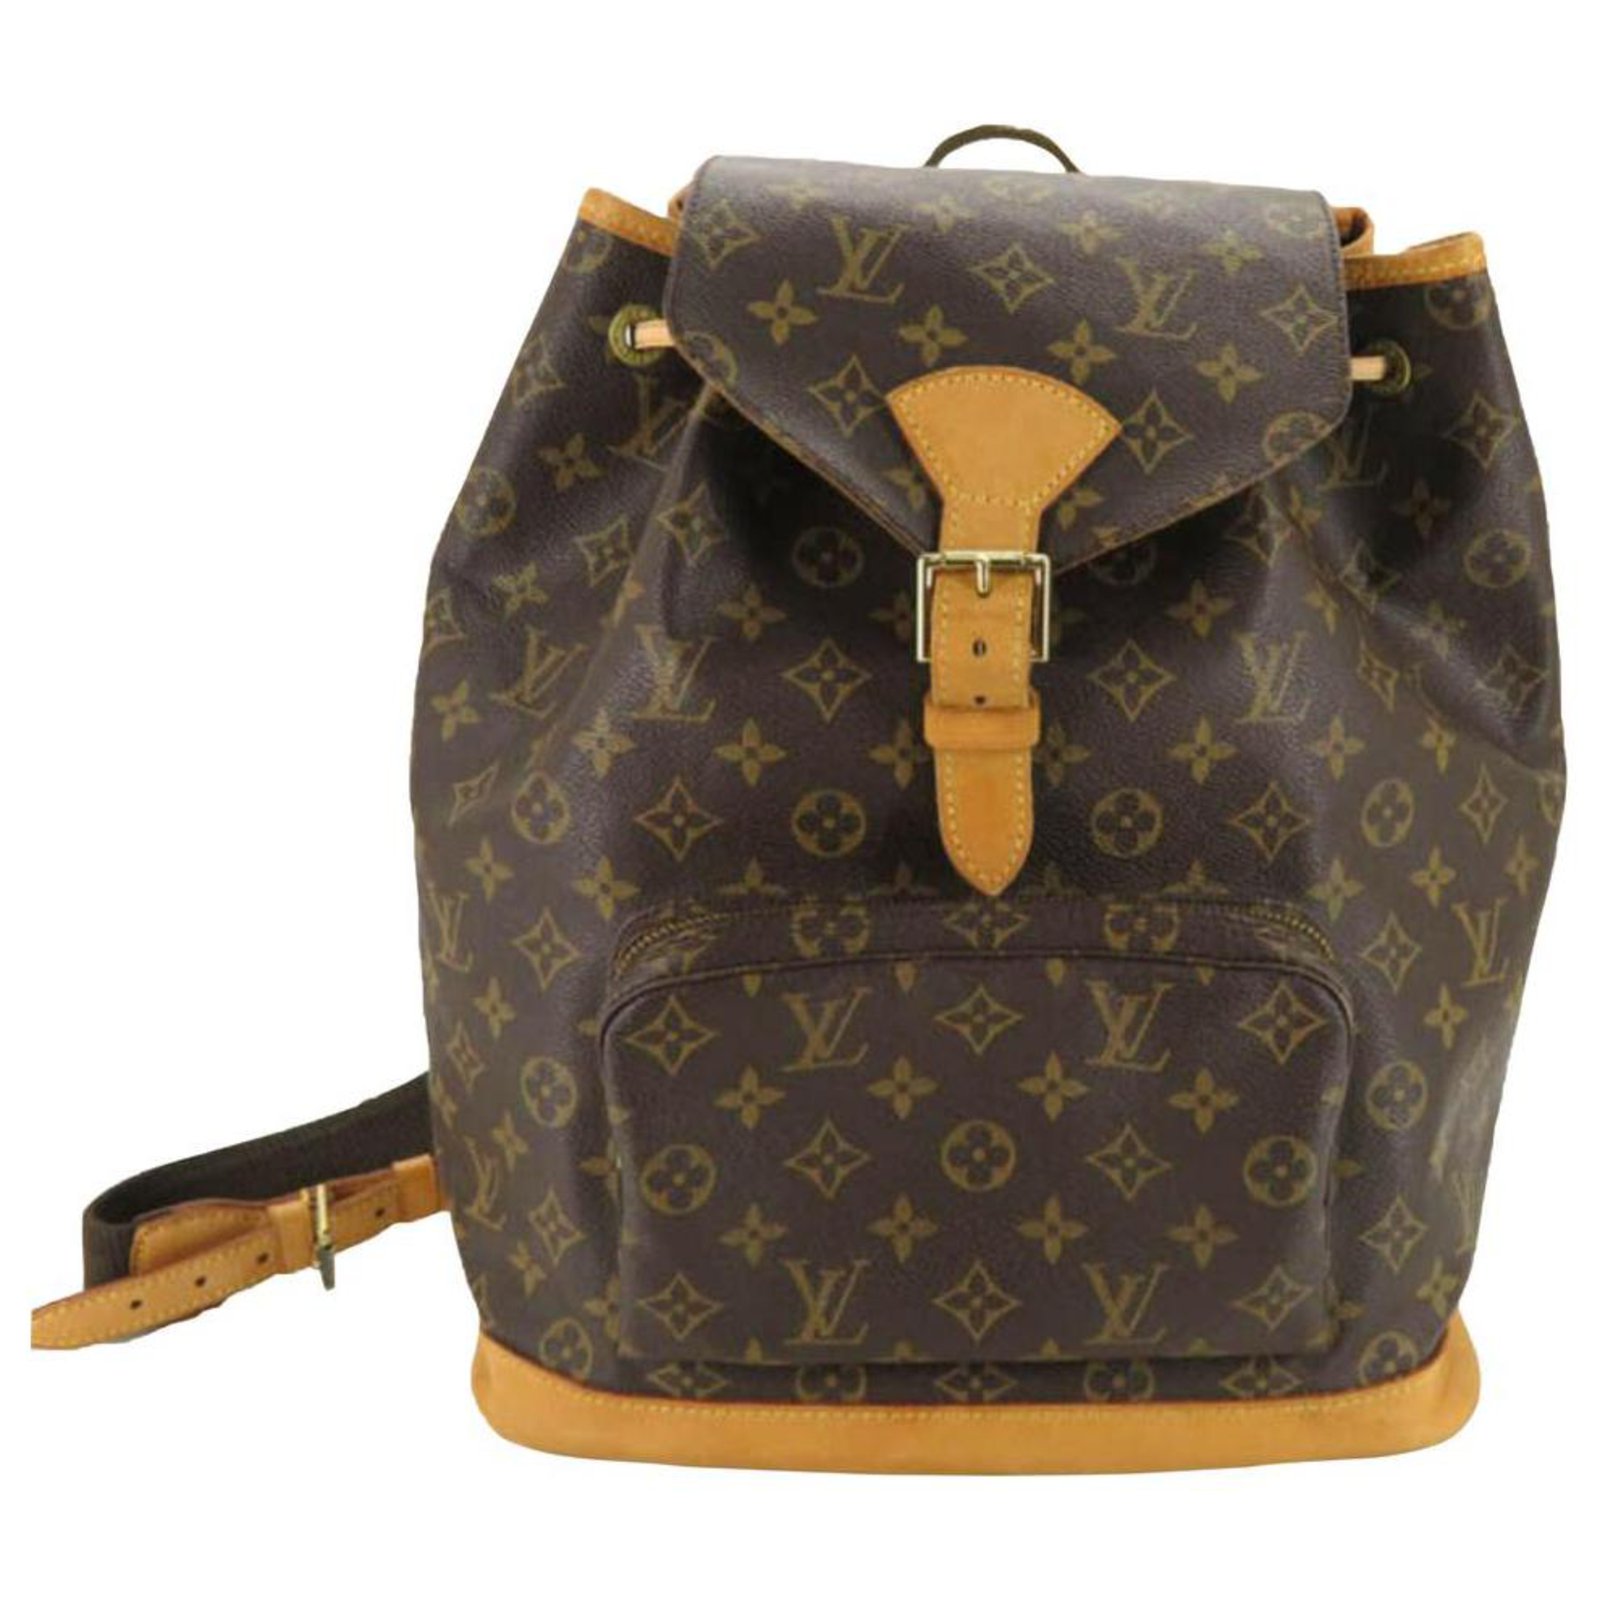 large louis vuitton backpack